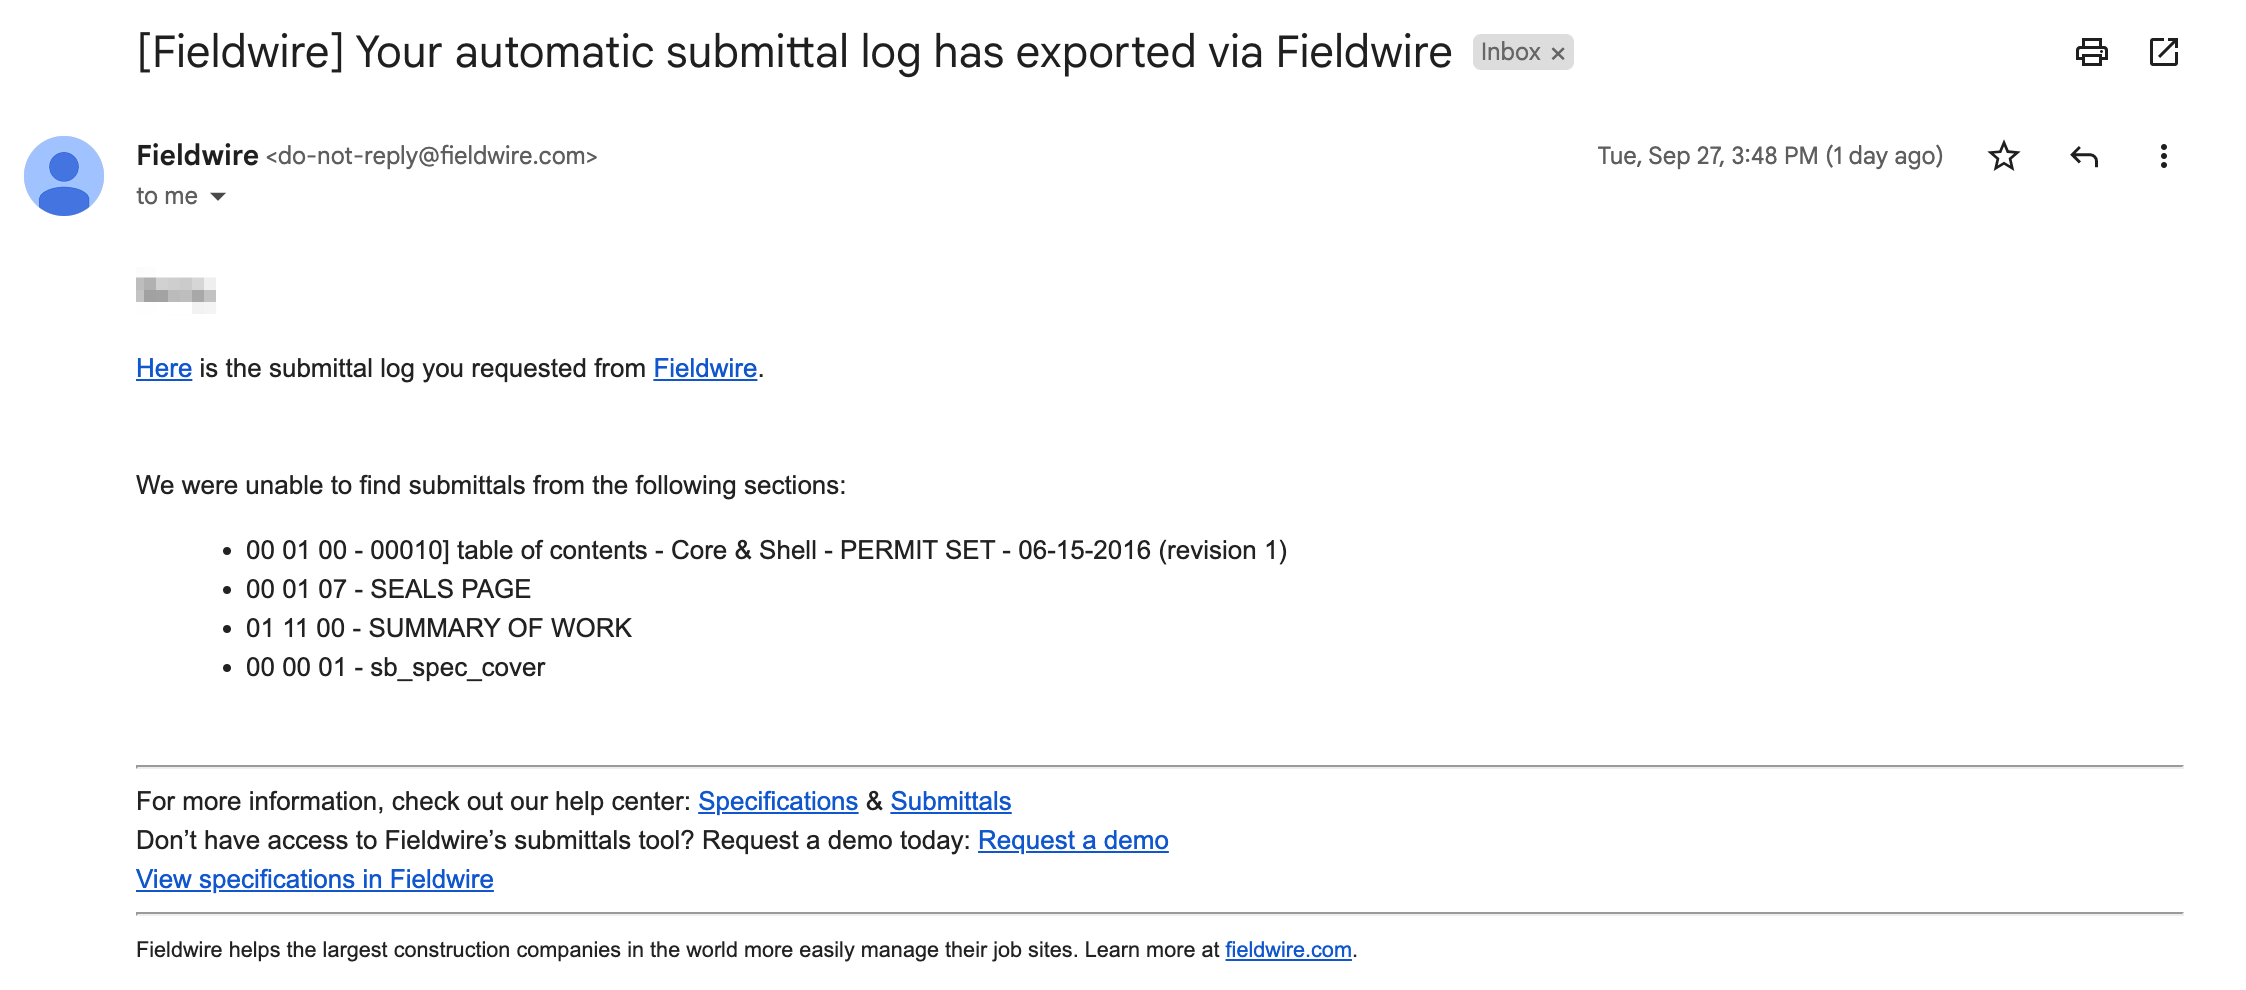 _Fieldwire__Your_automatic_submittal_log_has_exported_via_Fieldwire_-_benfieldwire2_gmail_com_-_Gmail.png